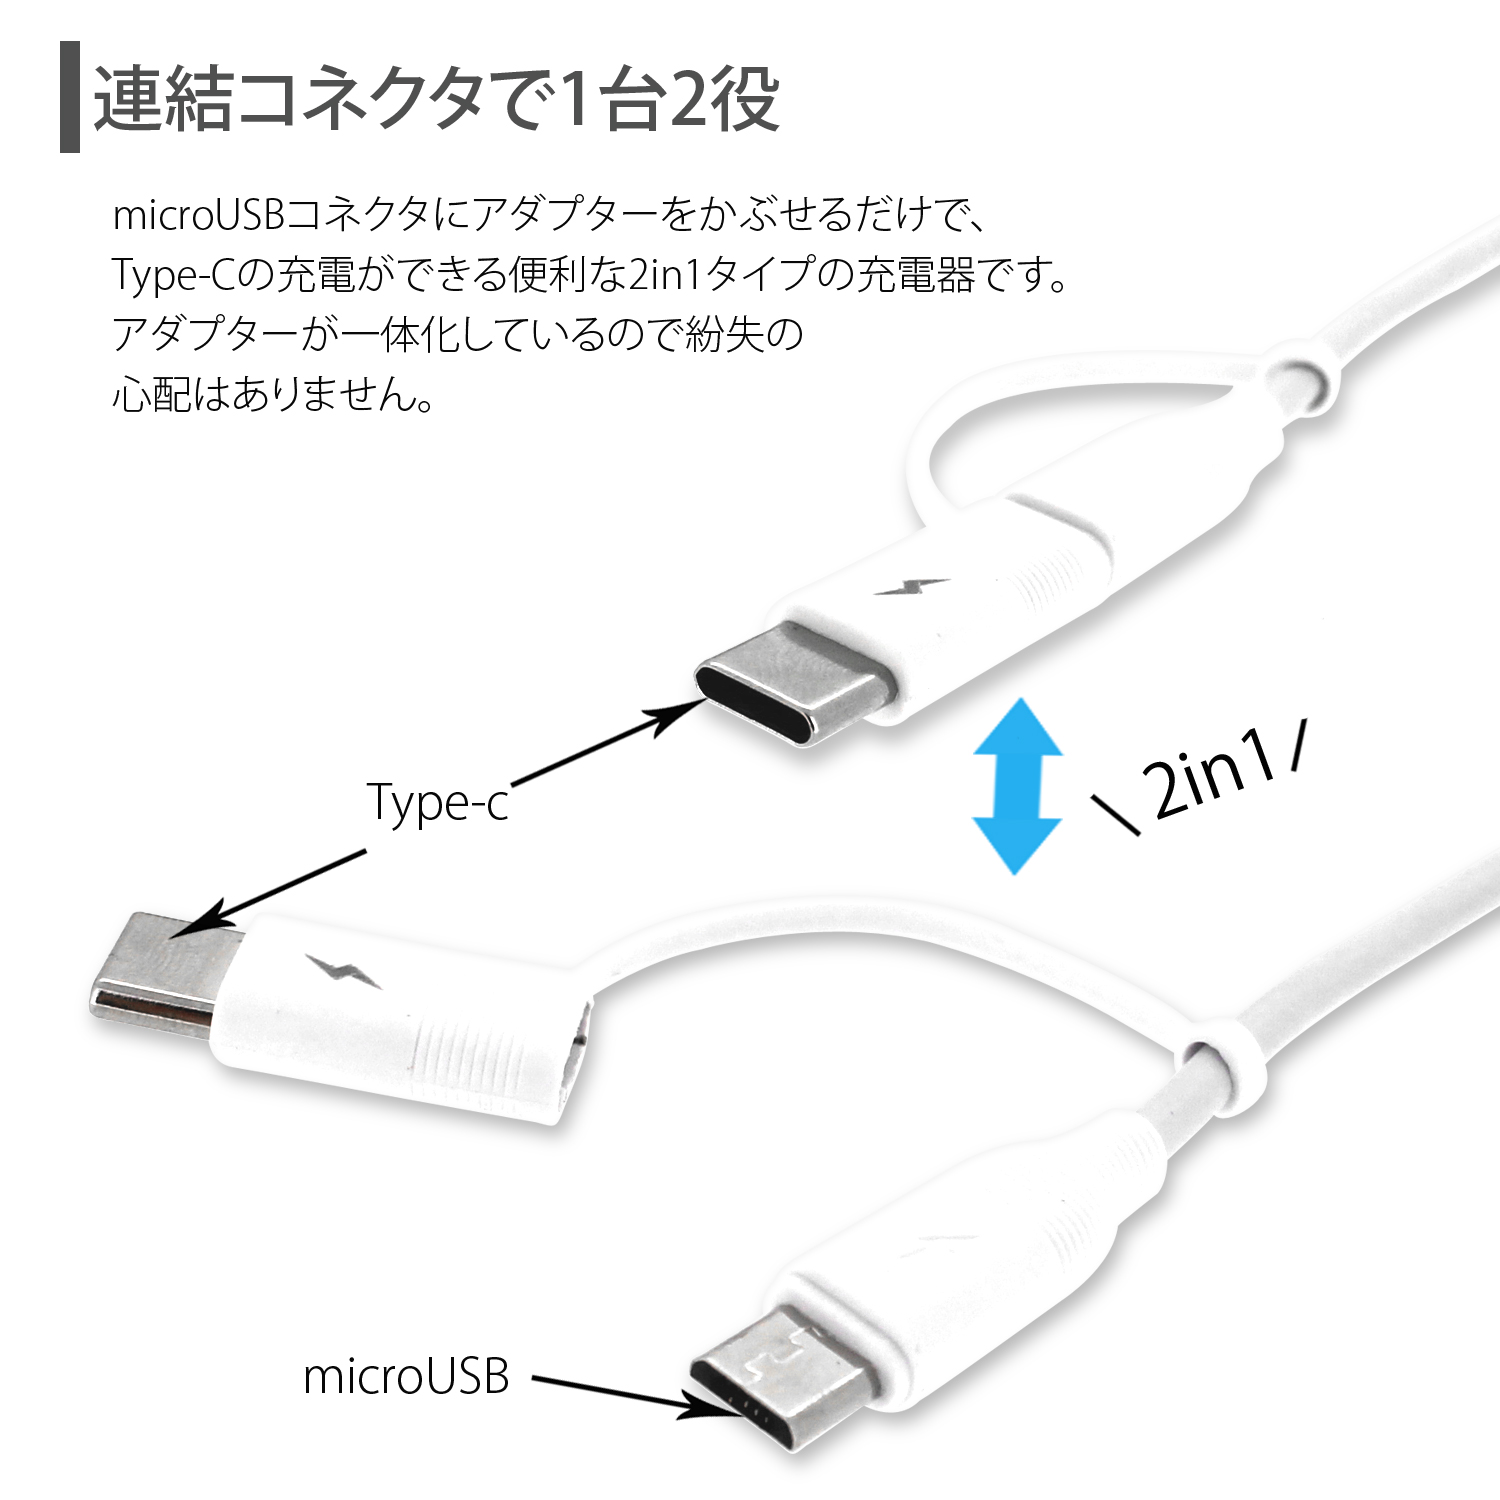 507sh Android One 送料無料 2in1 Type C Microusb Acアダプター 充電器 急速充電 対応 2 0a 10w 1 5m スマホ タブレット Ac充電器 家庭用コンセント タイプc タイプc コンパクト ホワイトナッツ